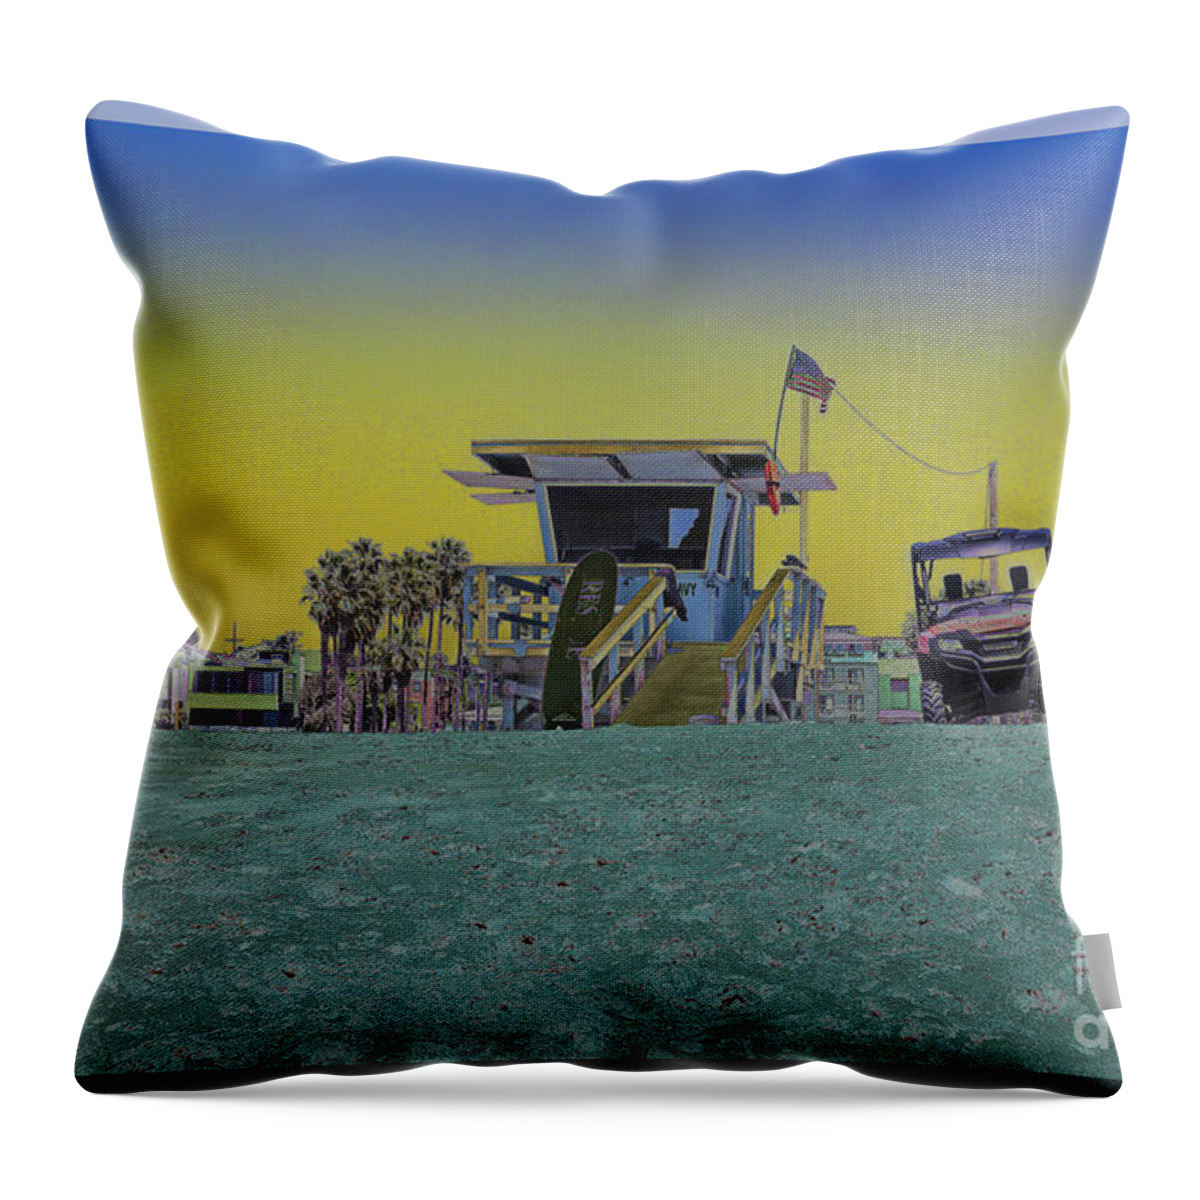 Lifeguard Tower Throw Pillow featuring the photograph Lifeguard Tower 4 by Joe Lach